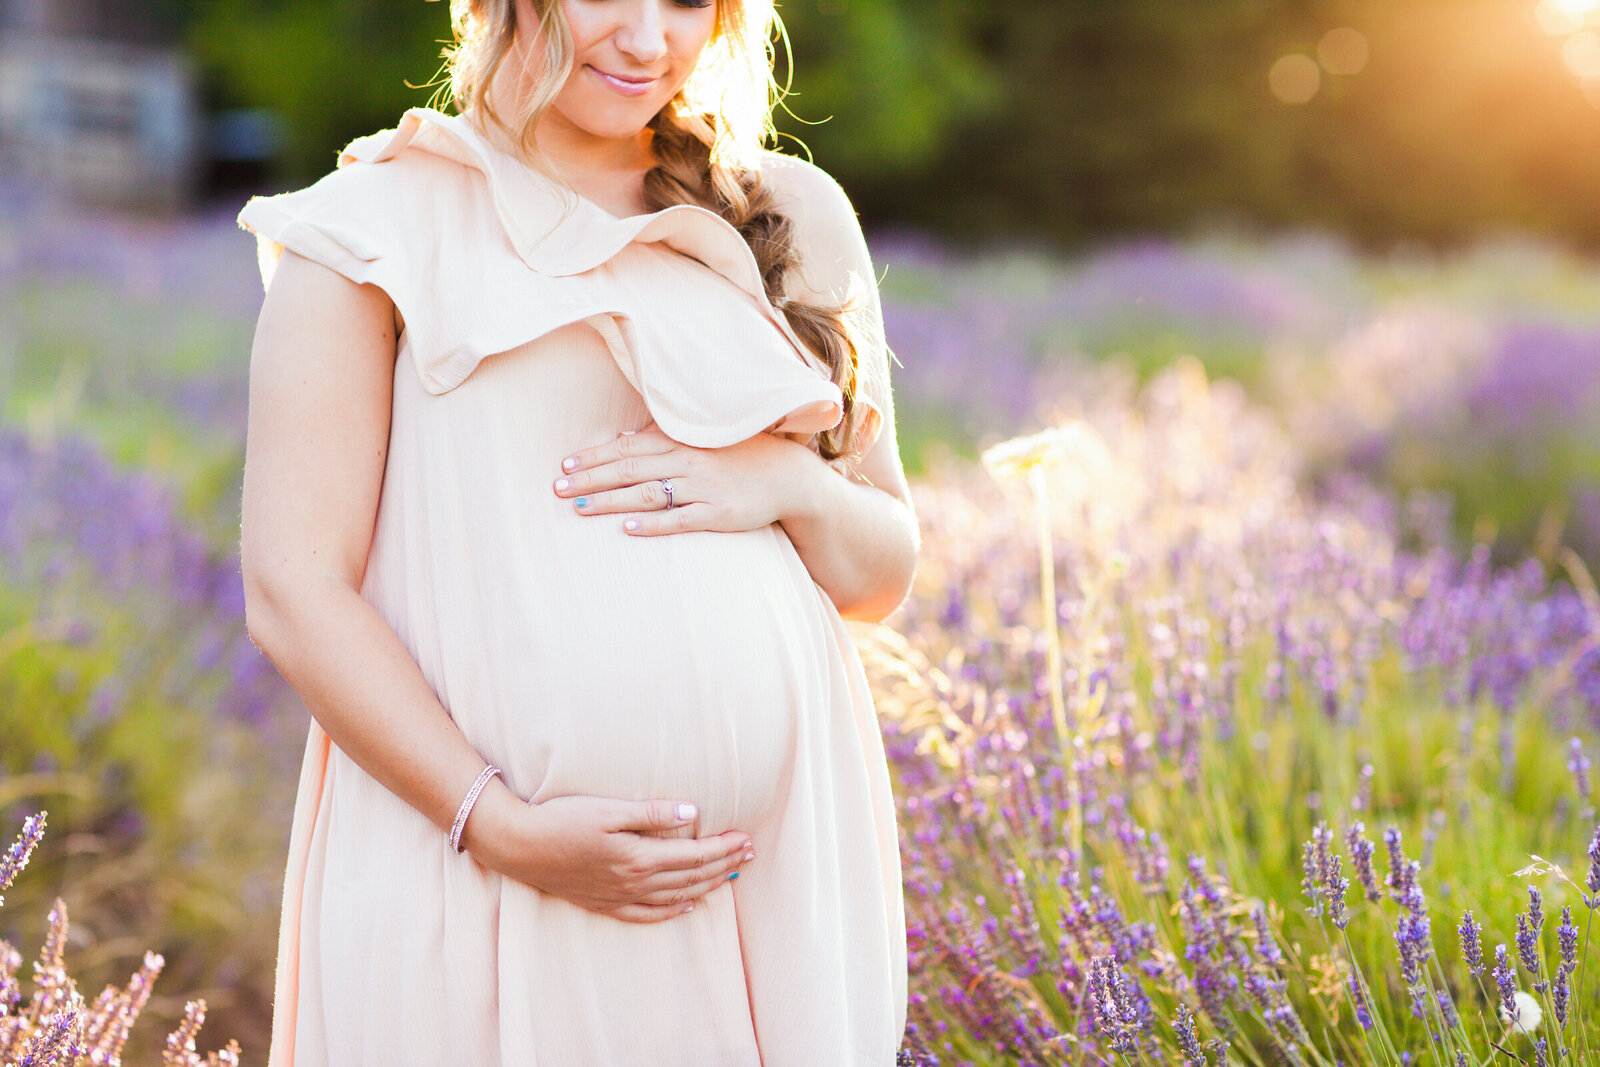 mom to be holding baby bump in lavender field